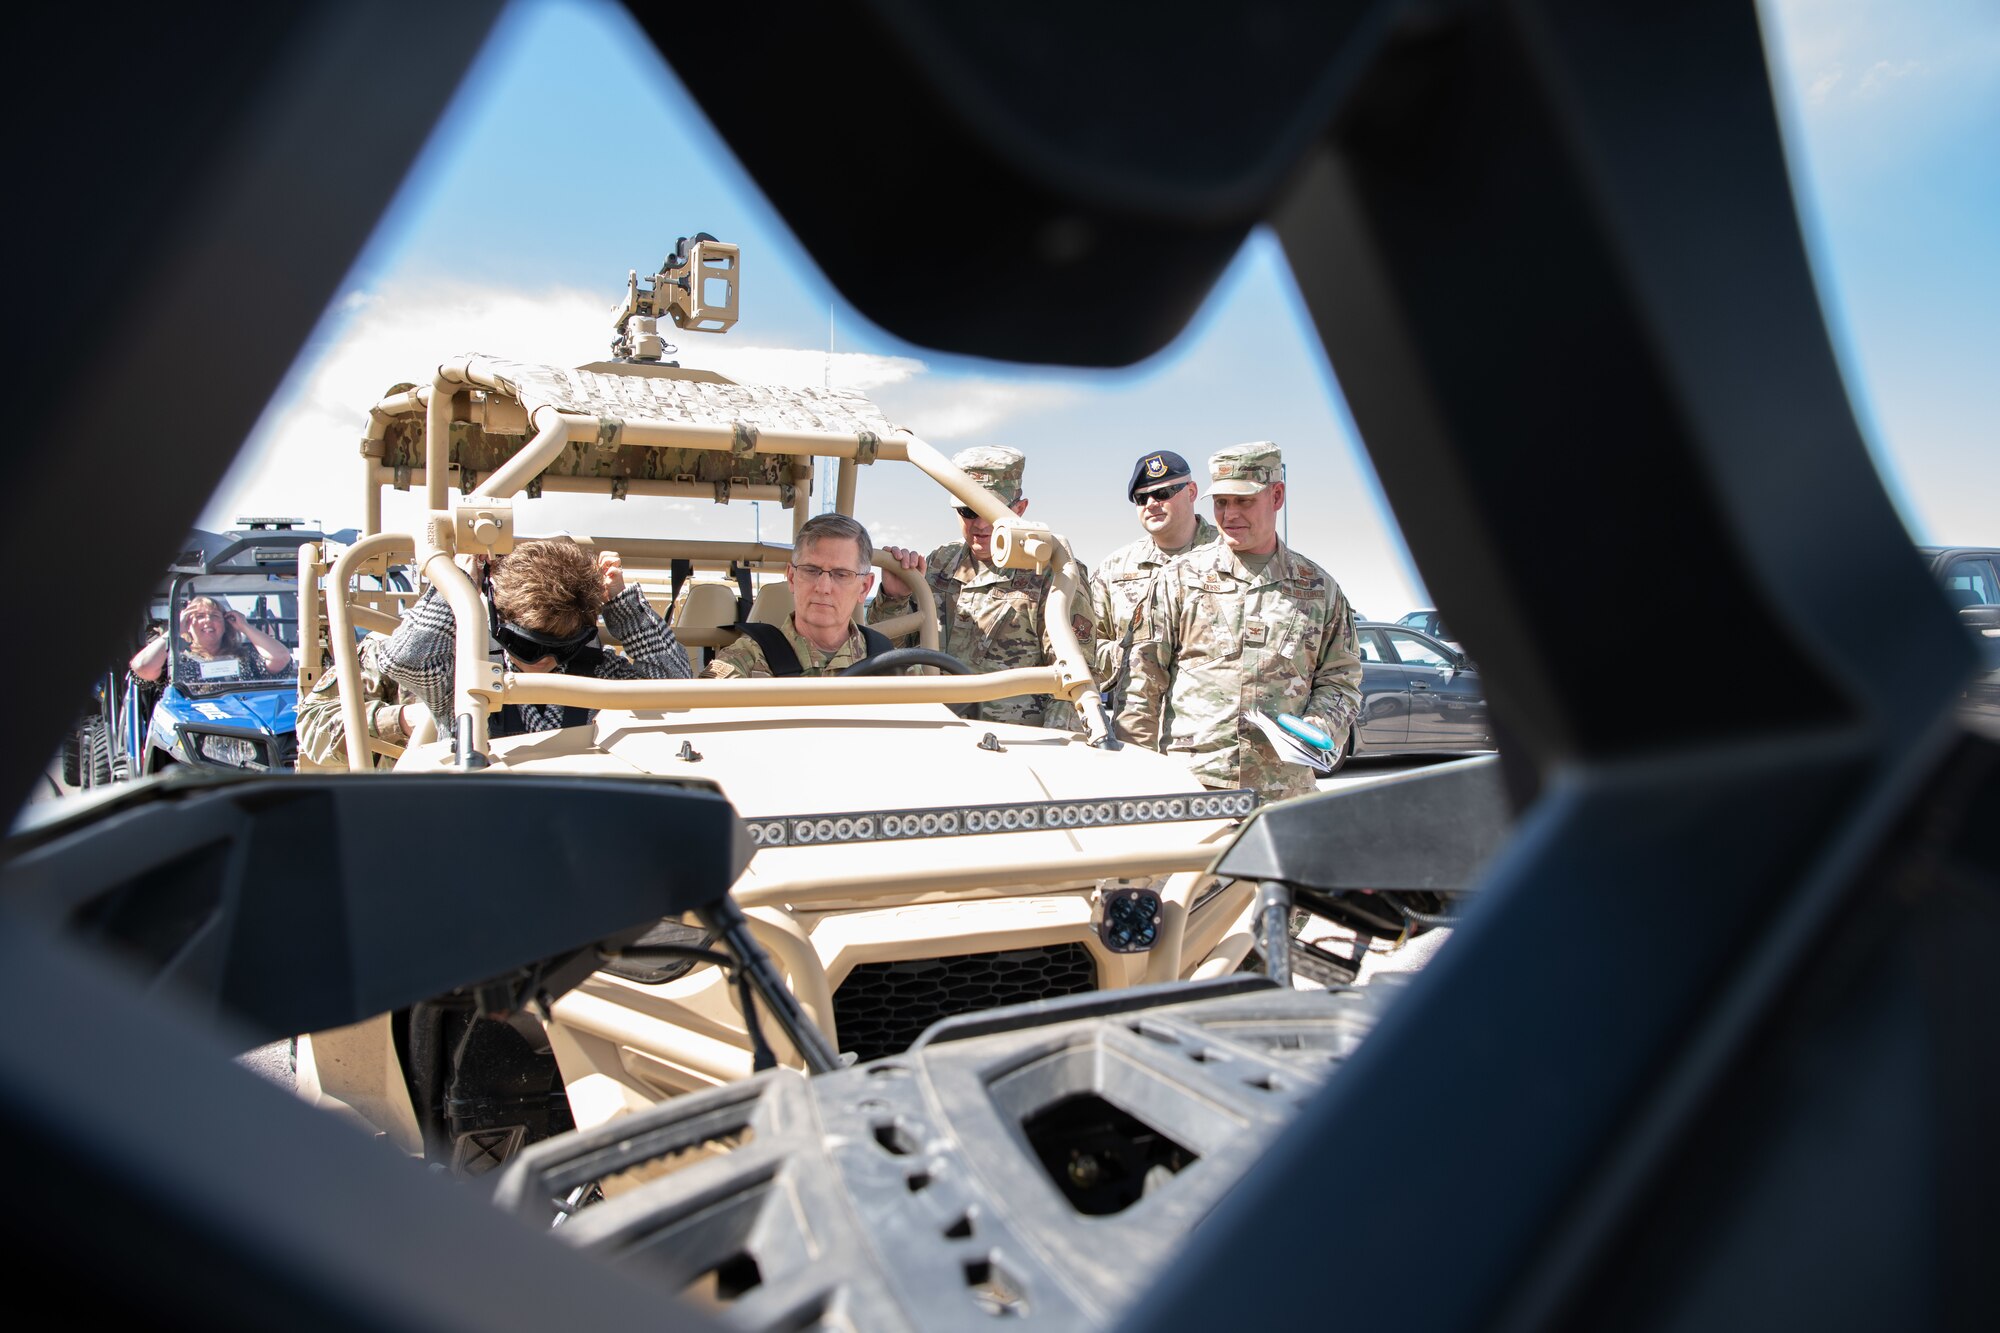 Gen. Tim Ray, Air Force Global Strike Command commander, prepares for a utility terrain vehicle ride at Ellsworth Air Force Base, S.D., May 26, 2021.